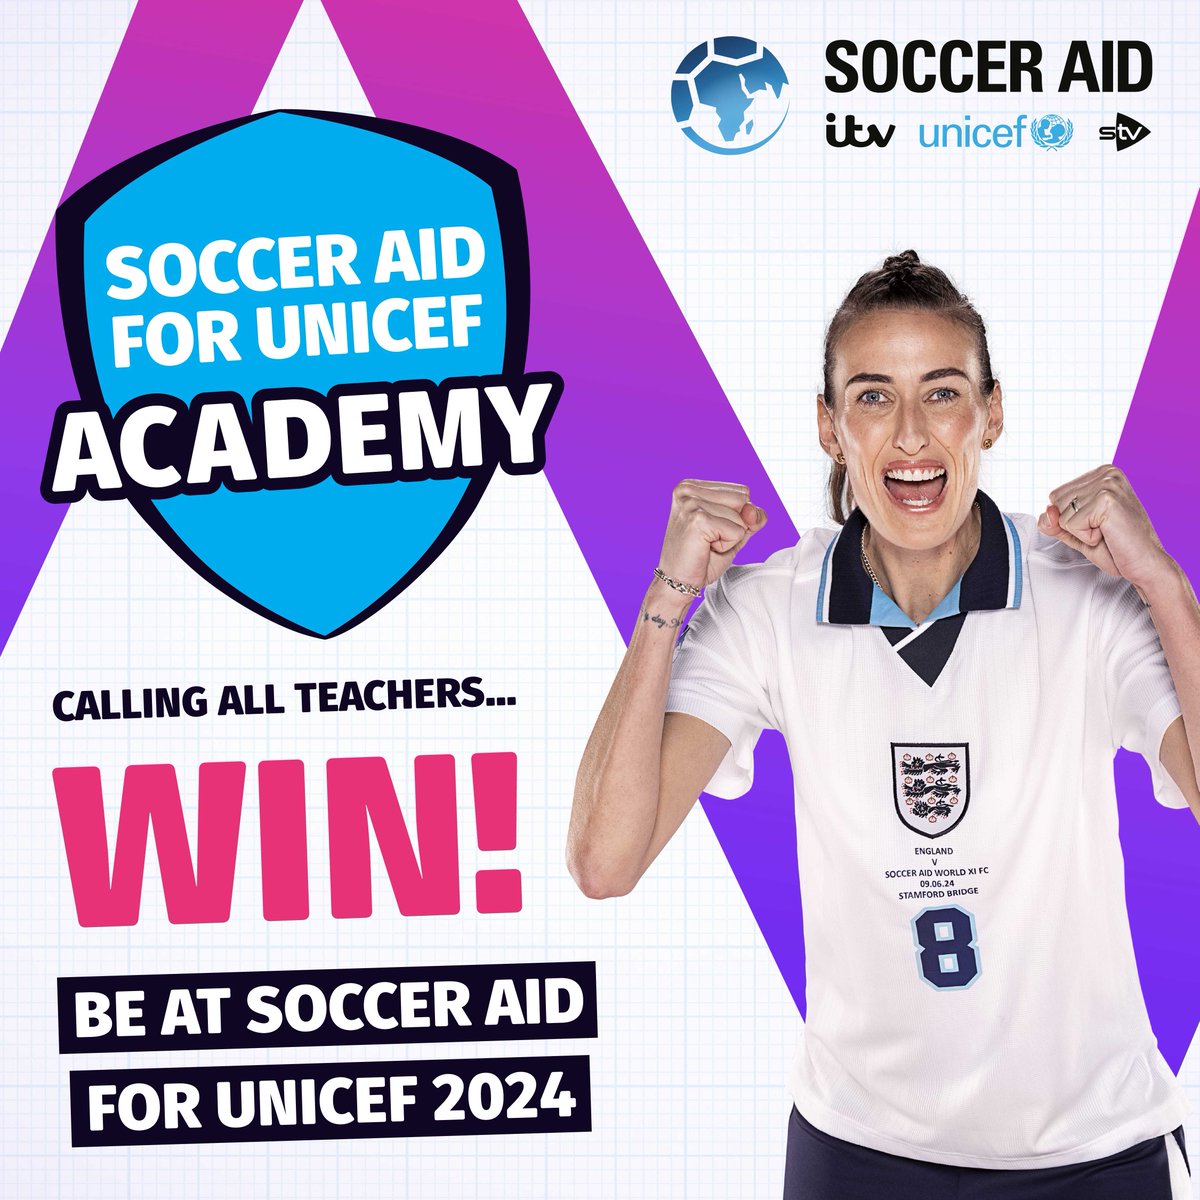 Sign up to the Soccer Aid for UNICEF Academy to enter the Mascot Design Competition! One student could be a winner and at Stamford Bridge on Sunday 9 June 2024. For more info go to socceraid.org.uk/schools 🏆 T&Cs apply.